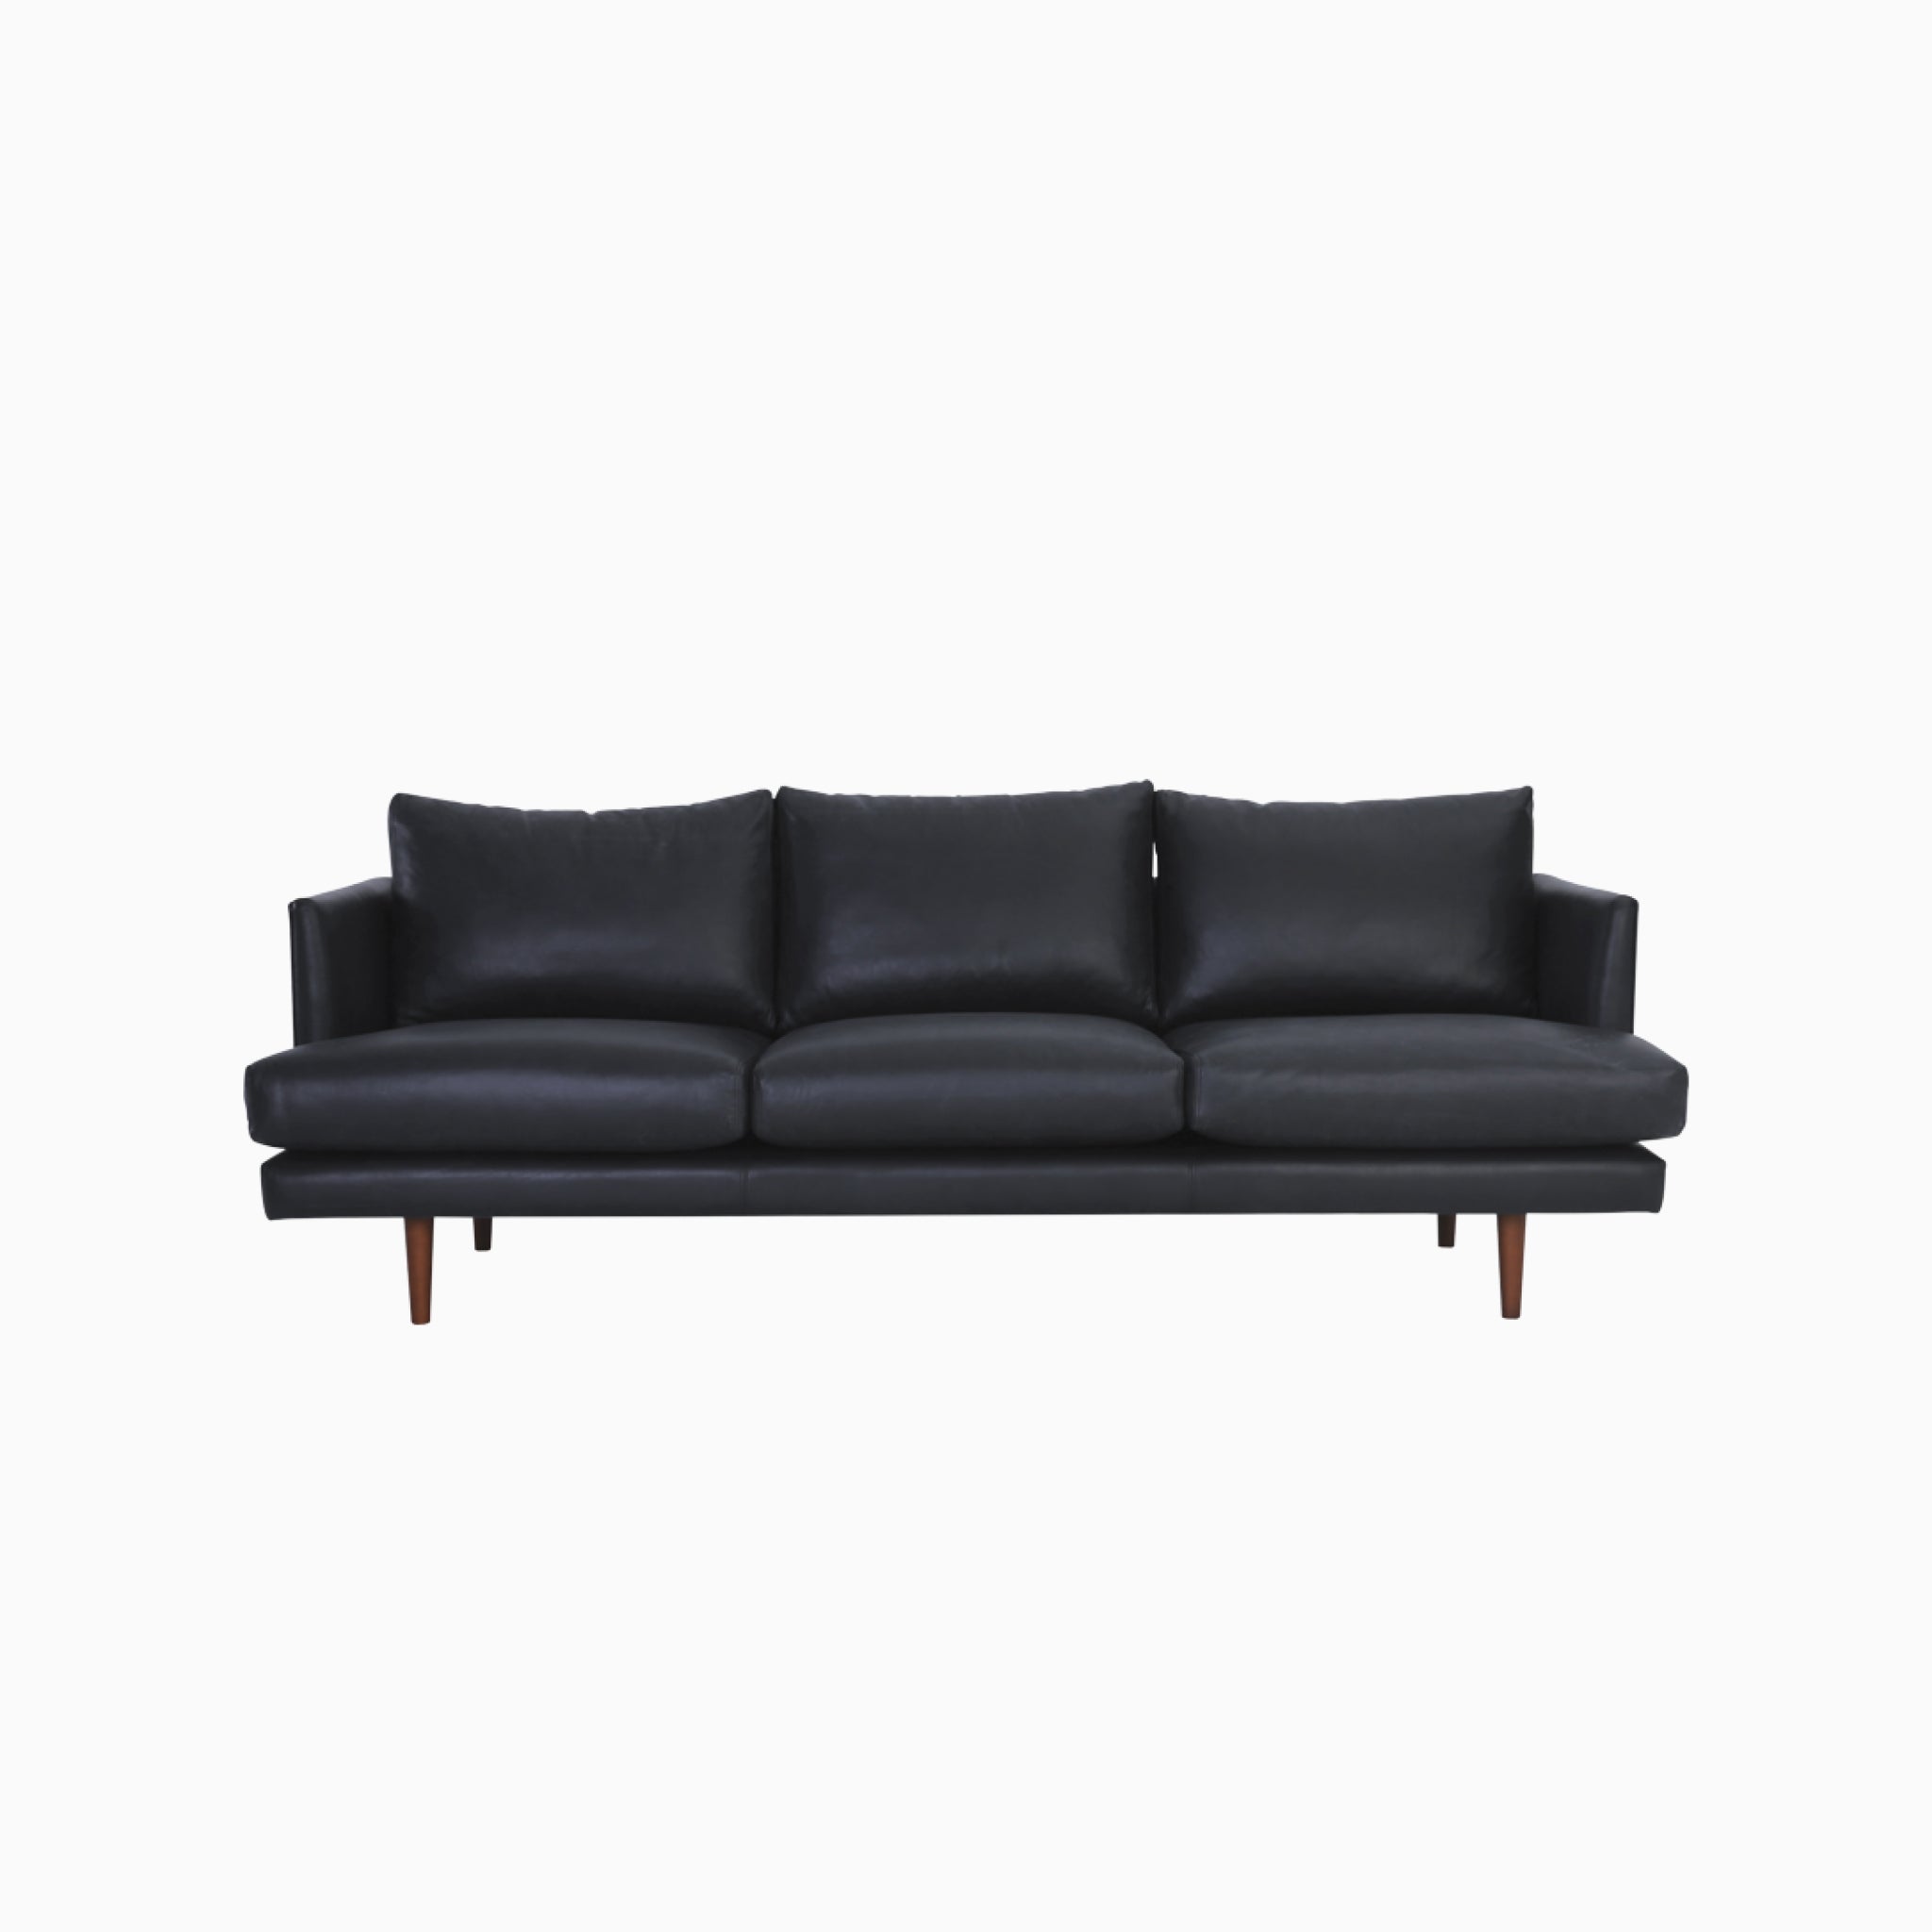 Nord Black Aniline Leather 3 Seater Sofa